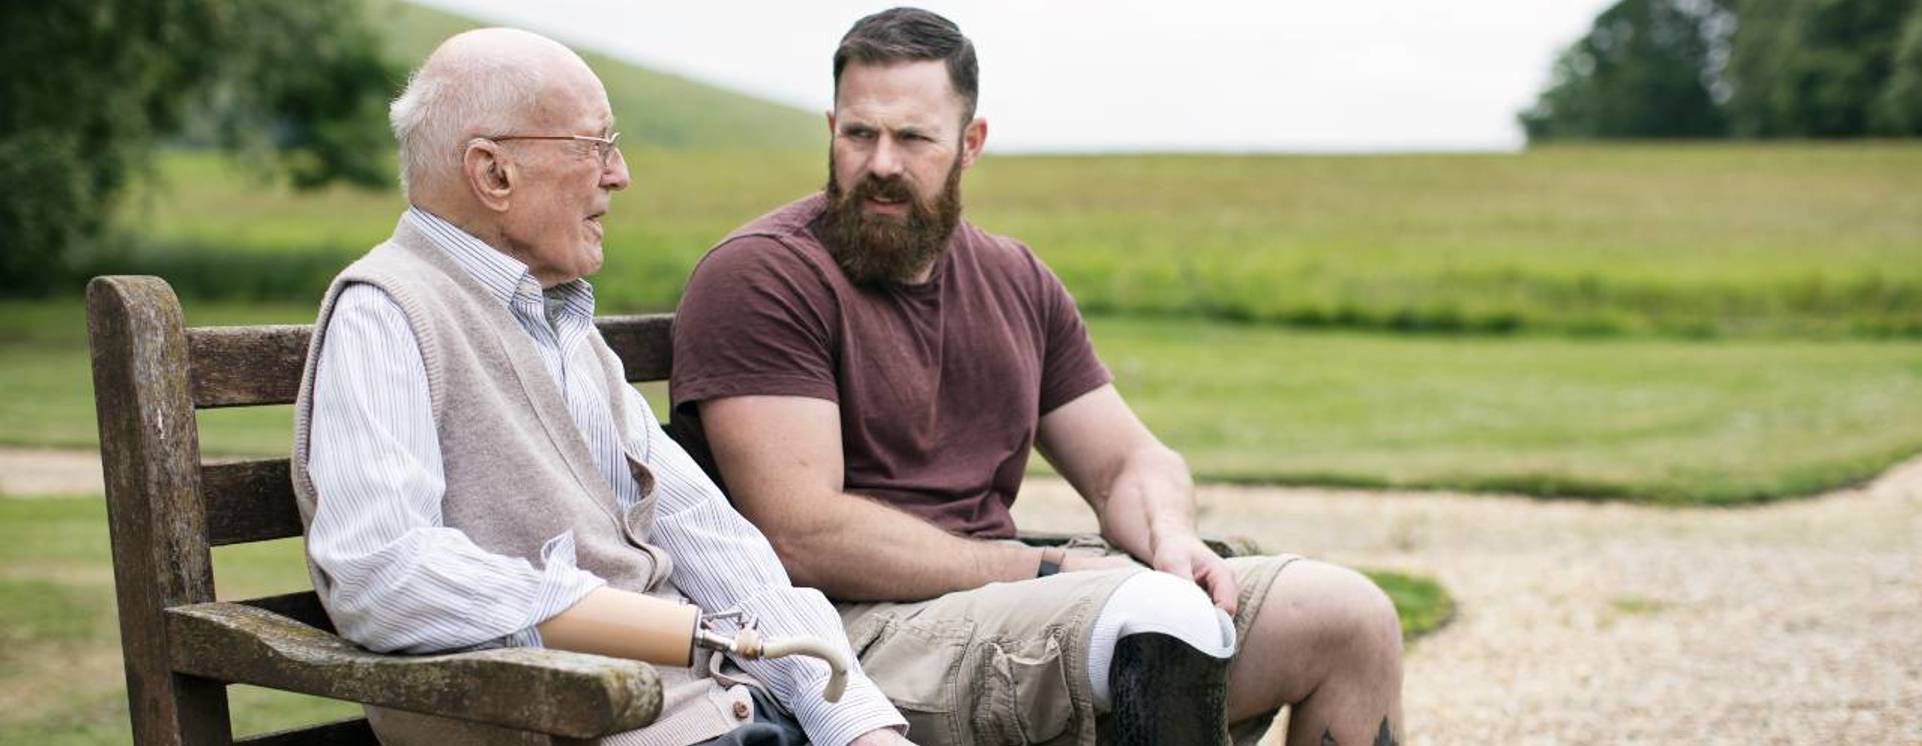 Two war veterans with prosthetic limbs sat on a bench